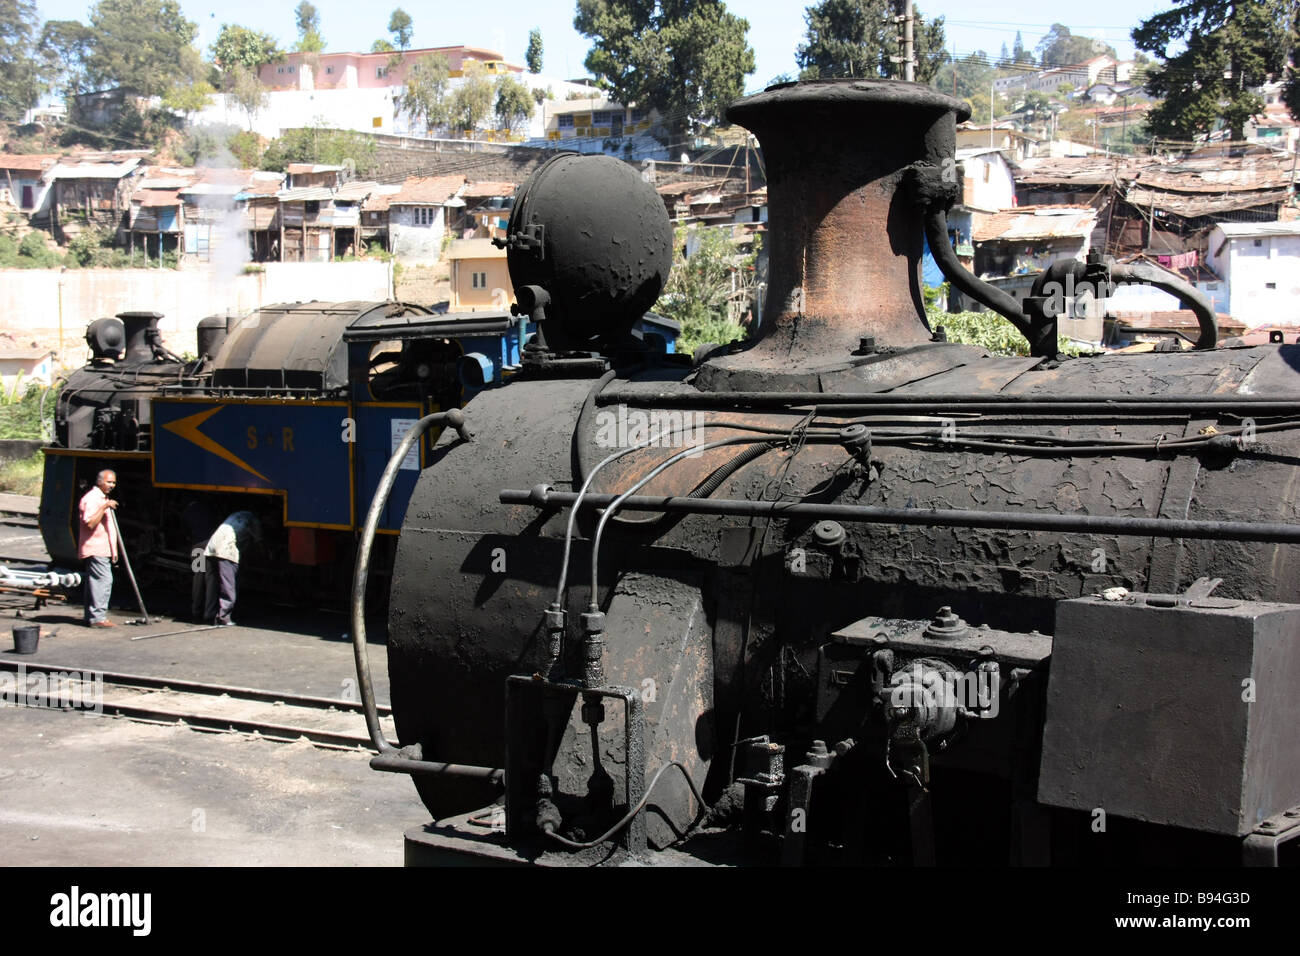 Steam powered narrow gauge locomotive at Connor (Coonoor) Station, India Stock Photo